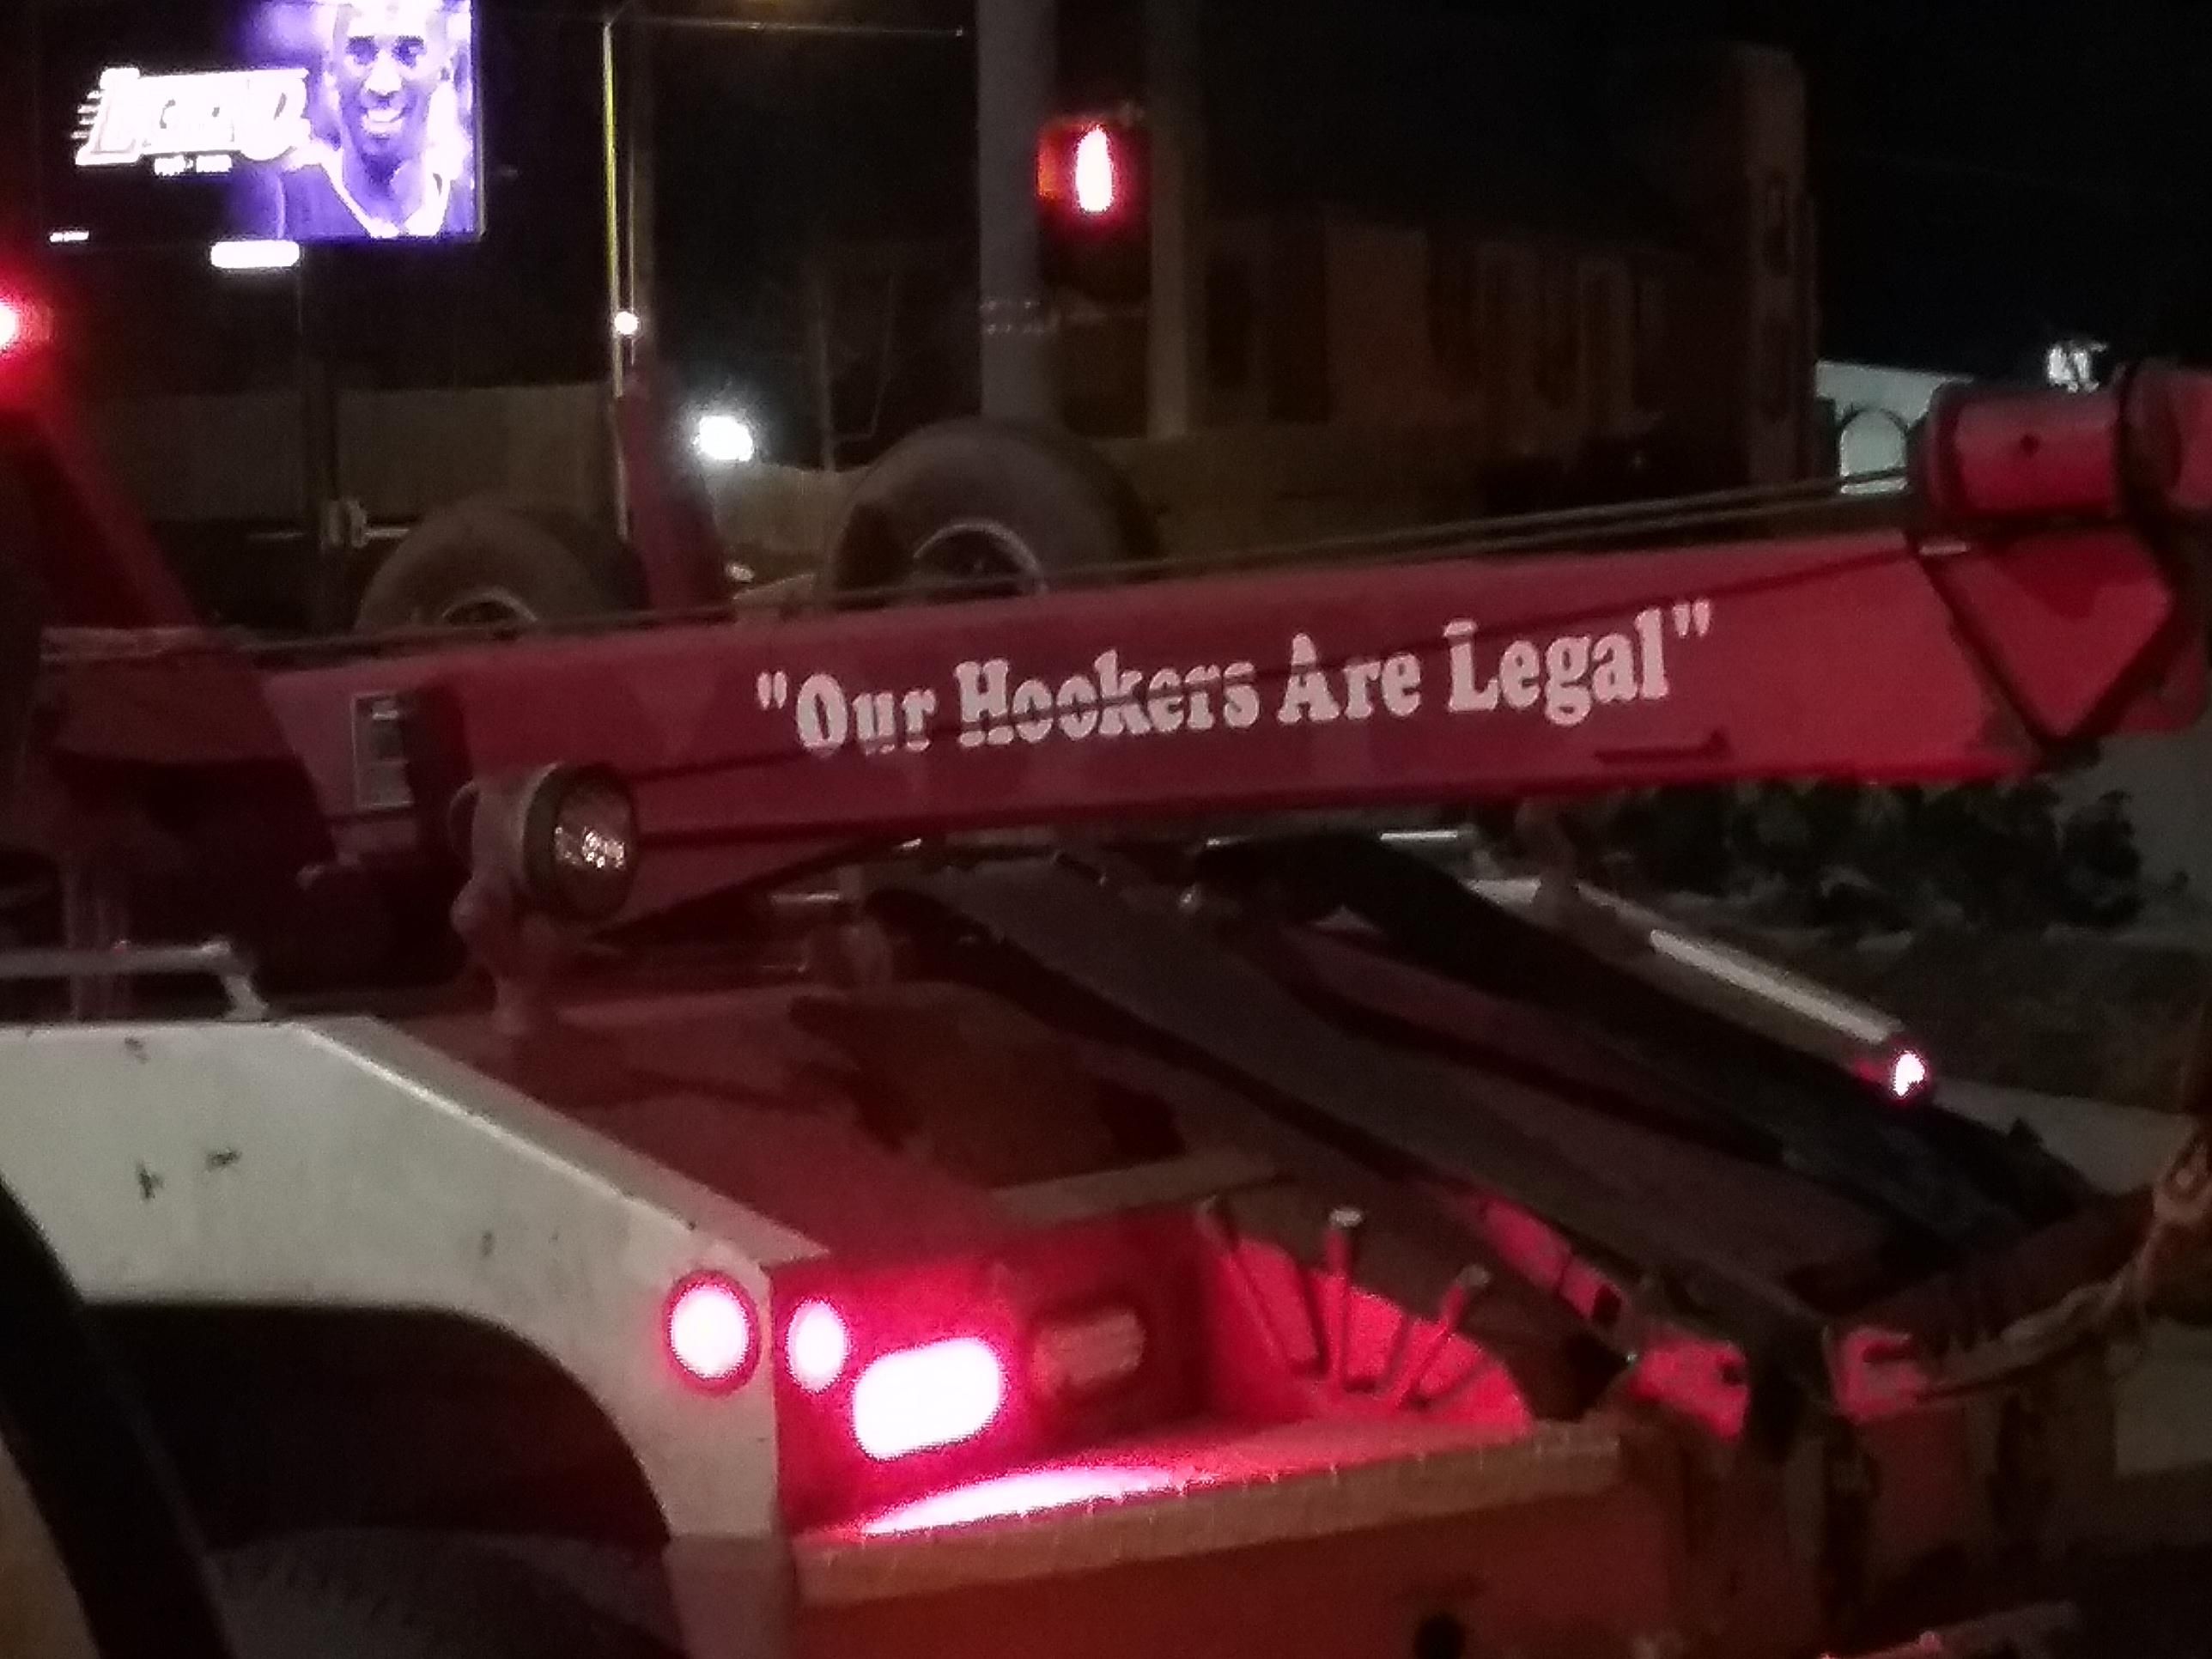 Saw a tow truck today